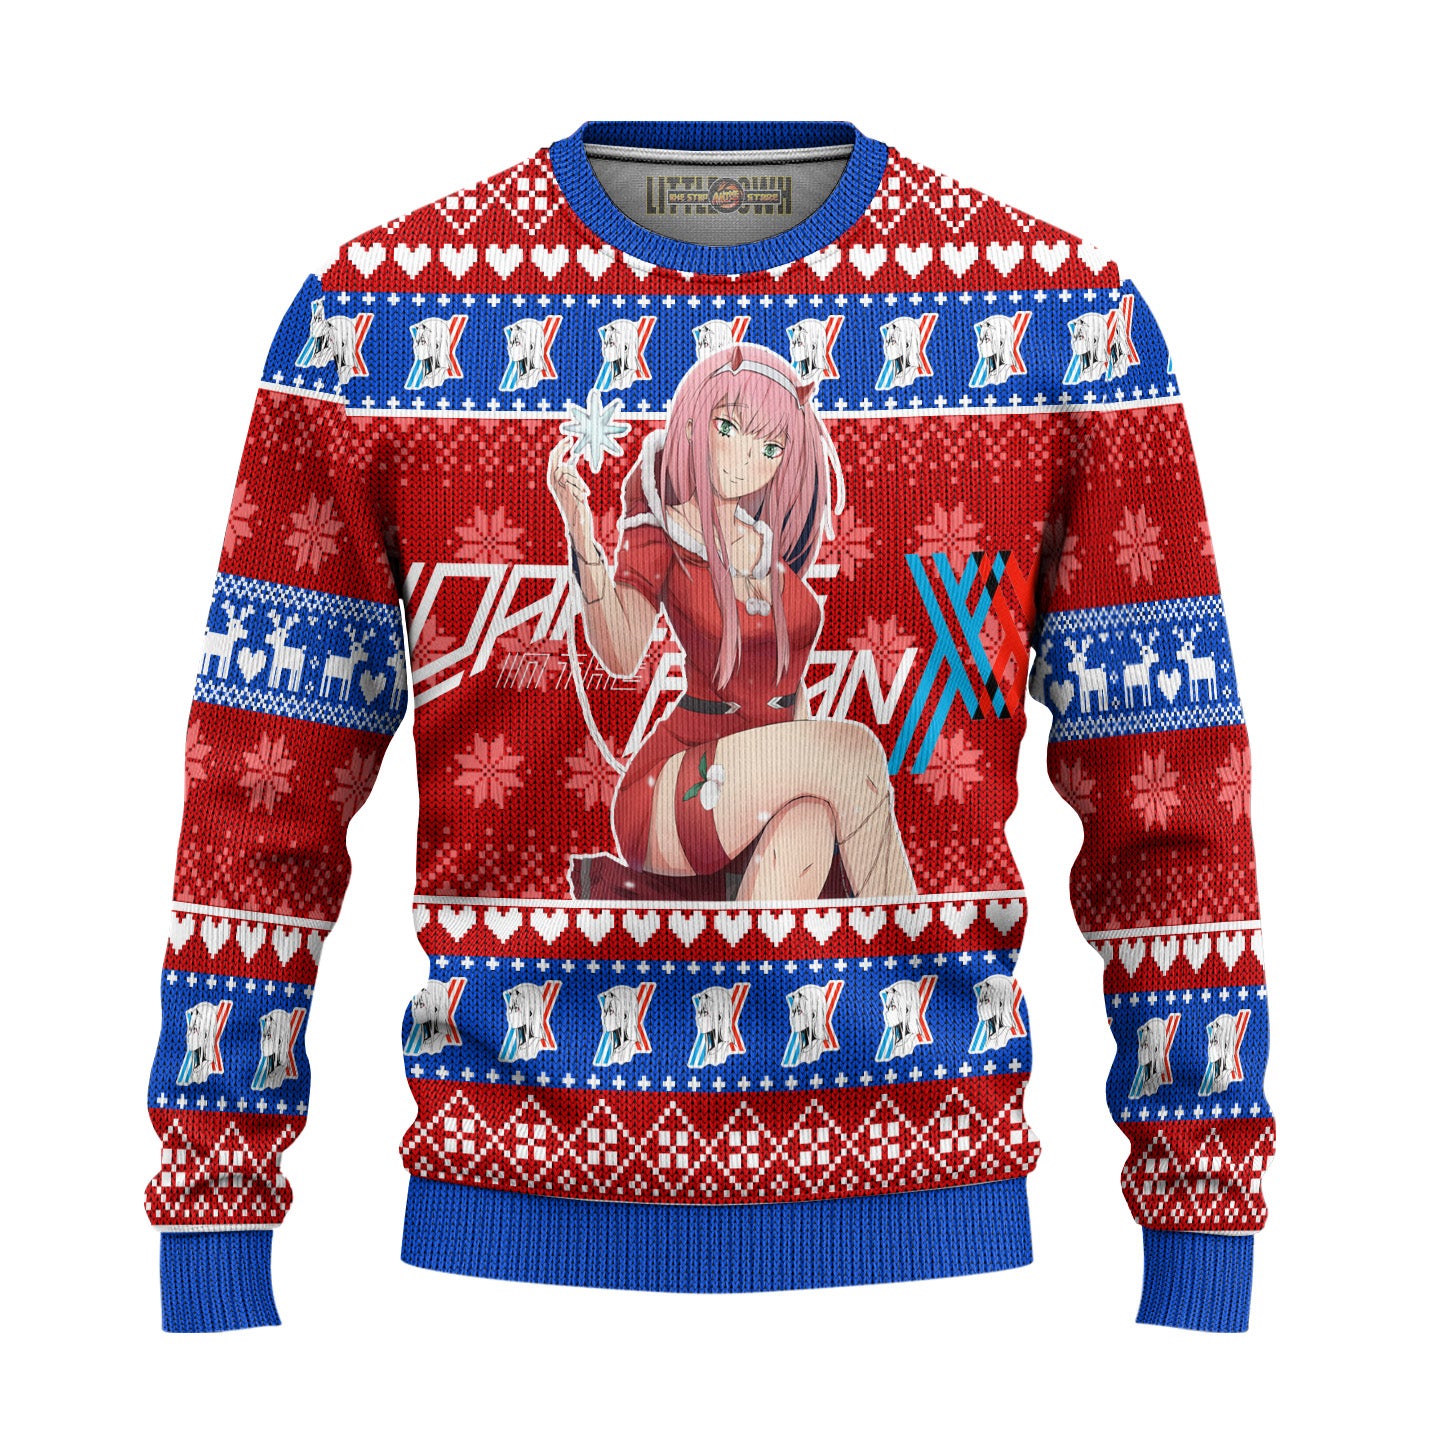 Zero Two Anime Ugly Christmas Sweater Custom Darling In The Franxx Gift For Fans